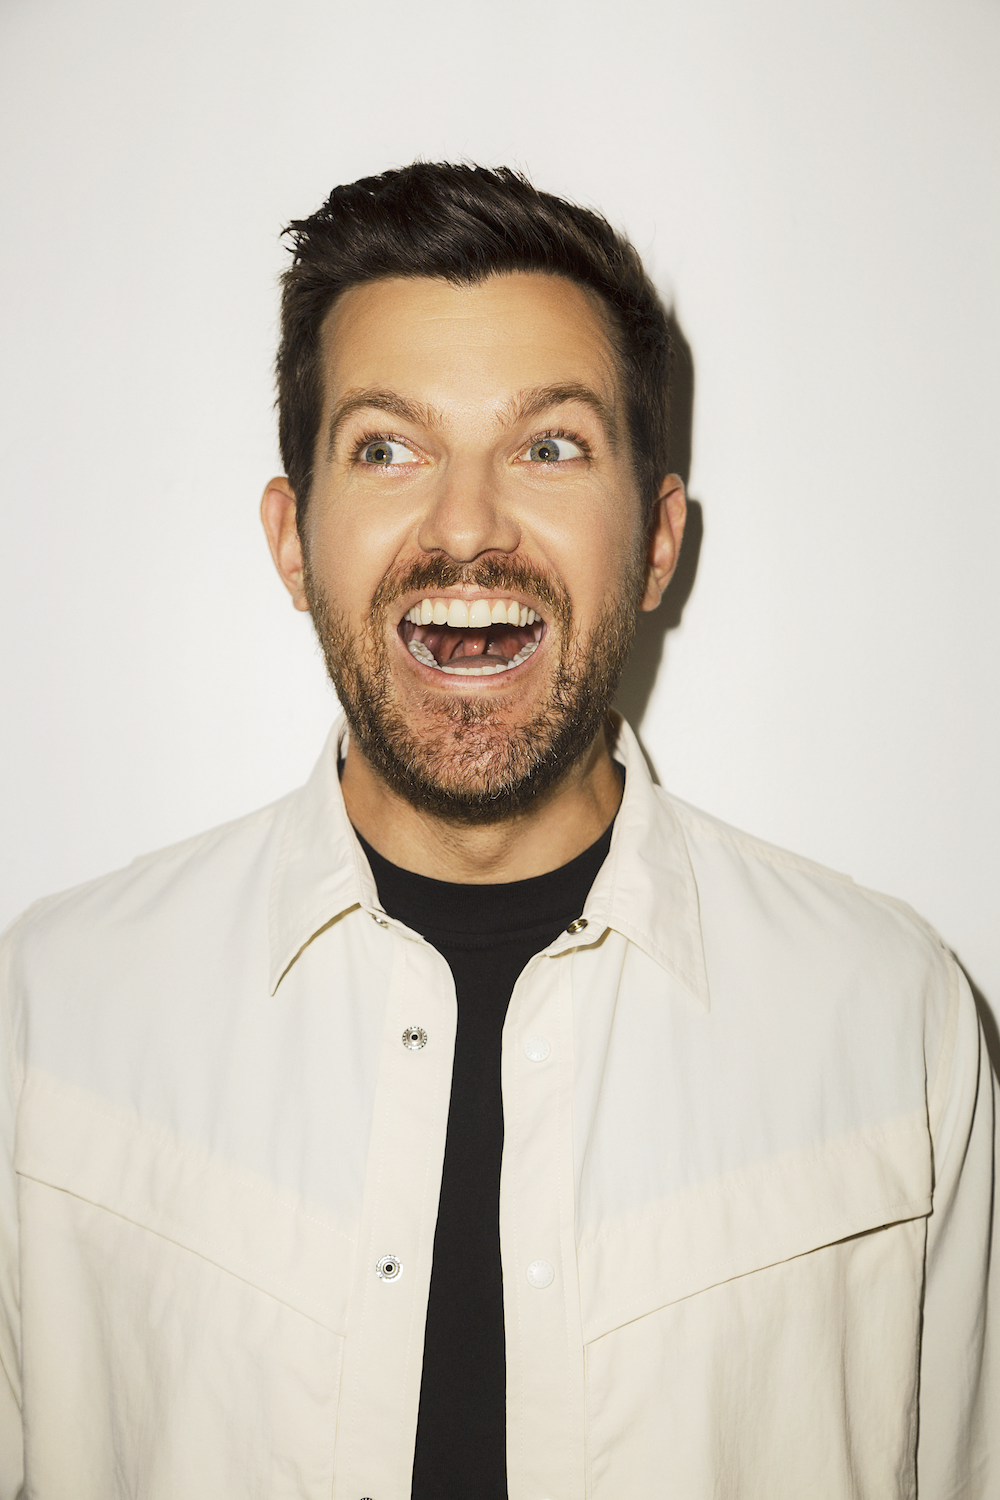 DILLON FRANCIS’ HOUSE ALBUM HAPPY MACHINE OUT OCTOBER 5 SHARES NEW TRACK AND VIDEO ‘REACHING OUT’ FEATURING BOW ANDERSON